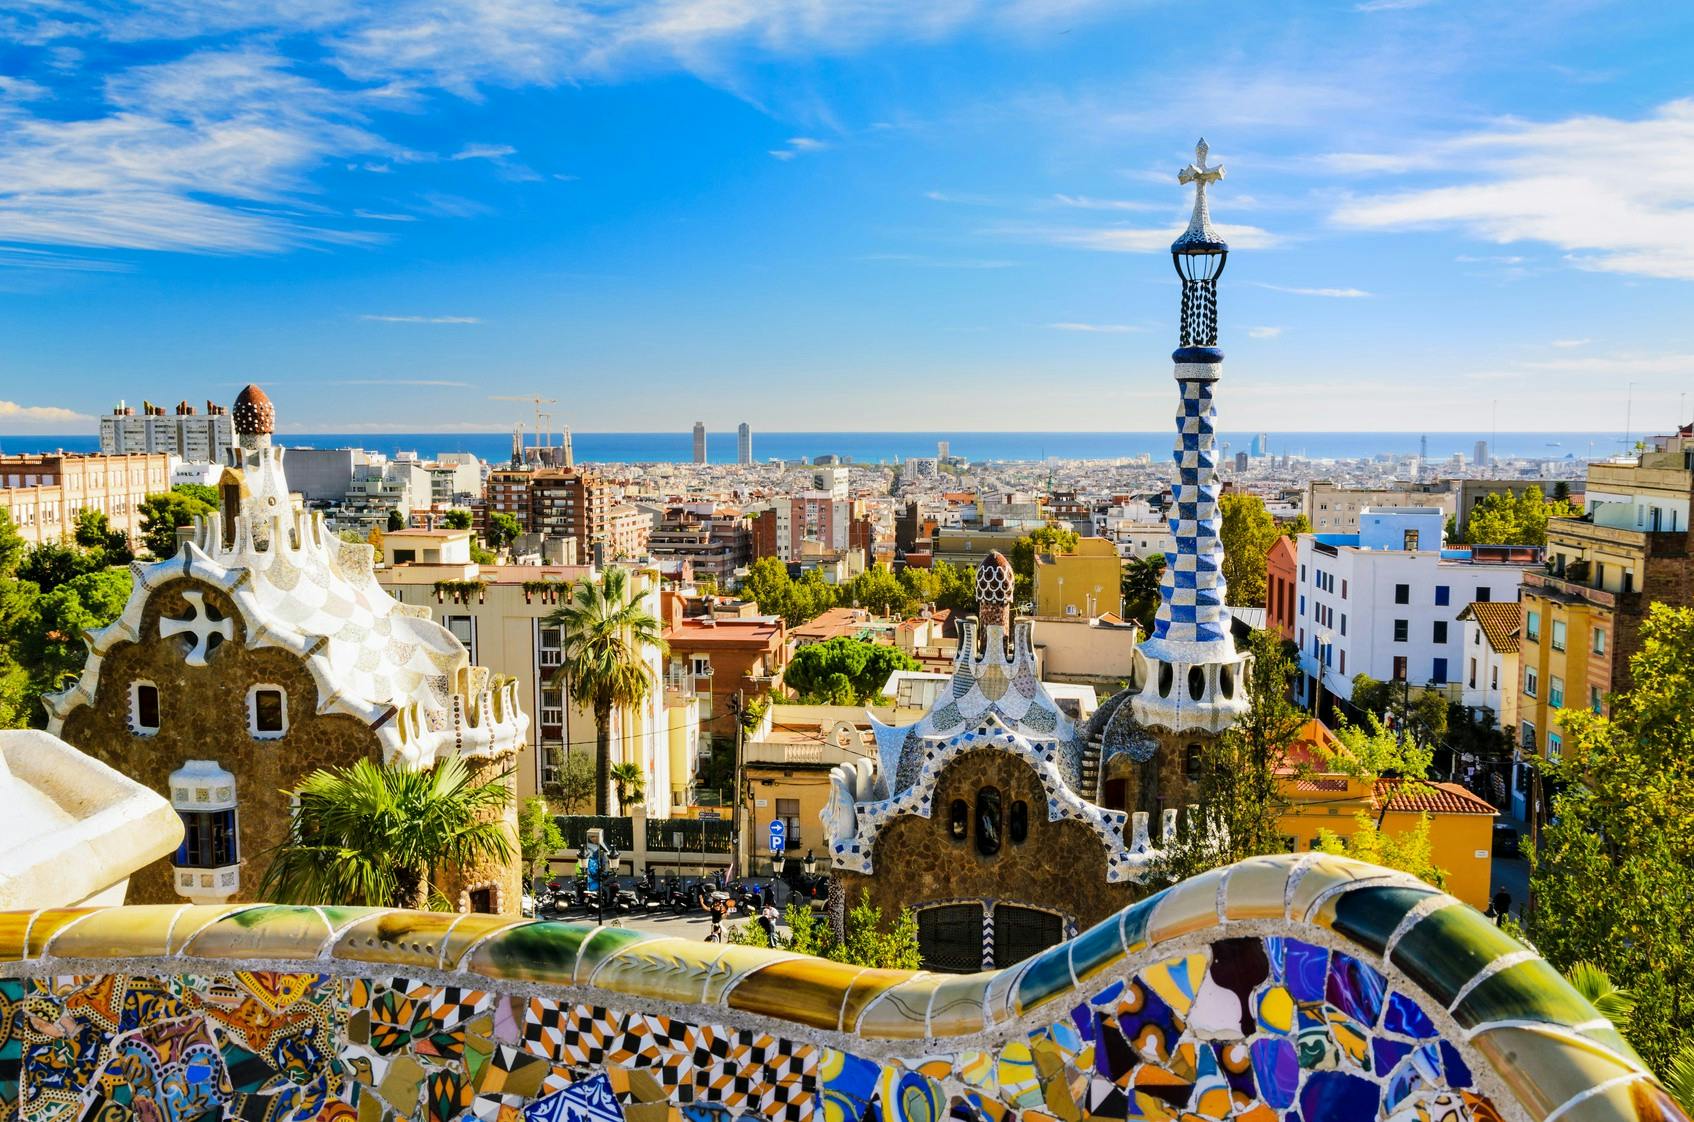 Fast Track guided tour Sagrada Familia with Towers and Park Güell including Transfer-8